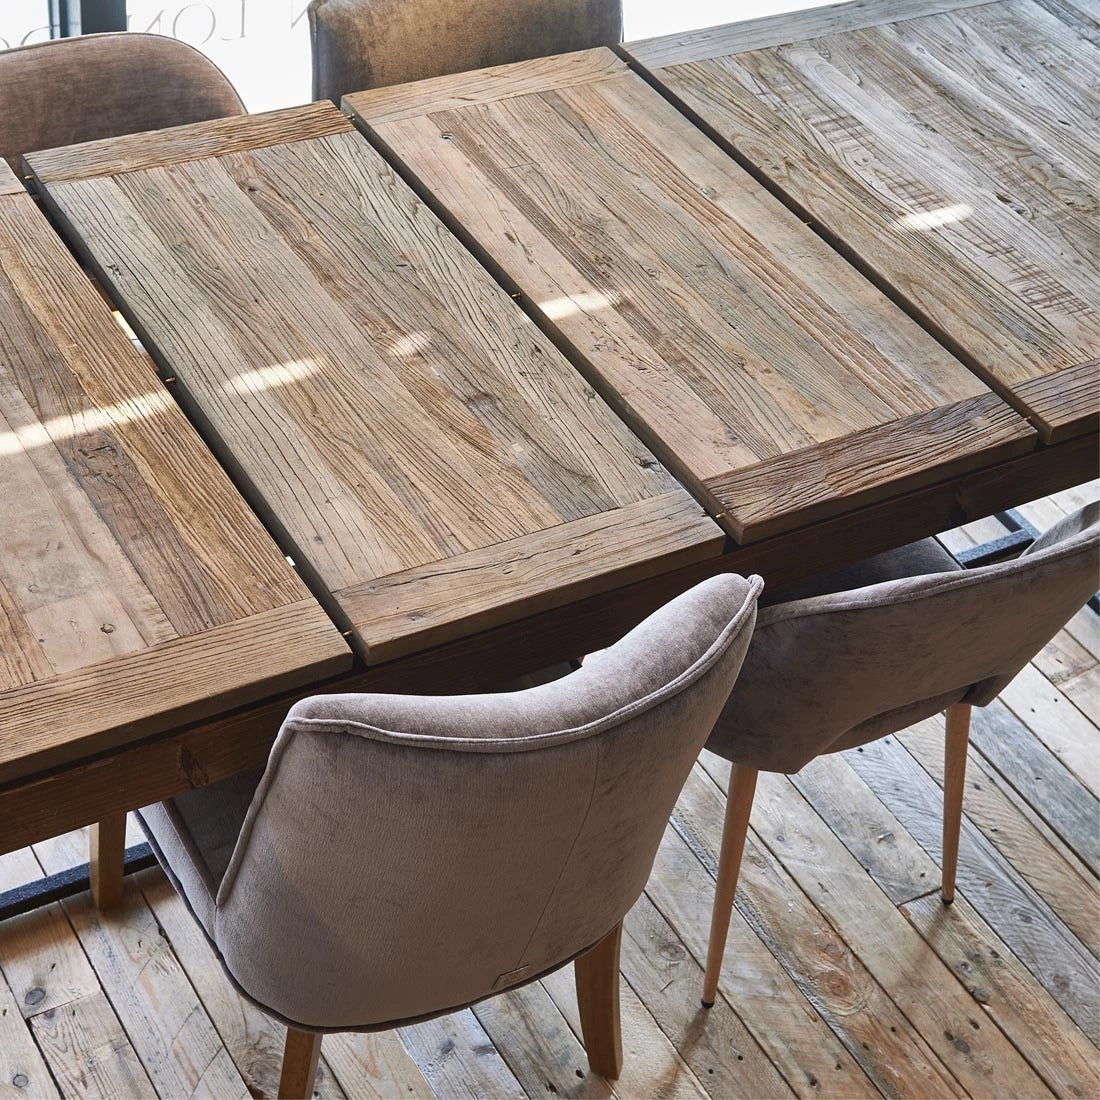 SHELTER ISLAND dining table